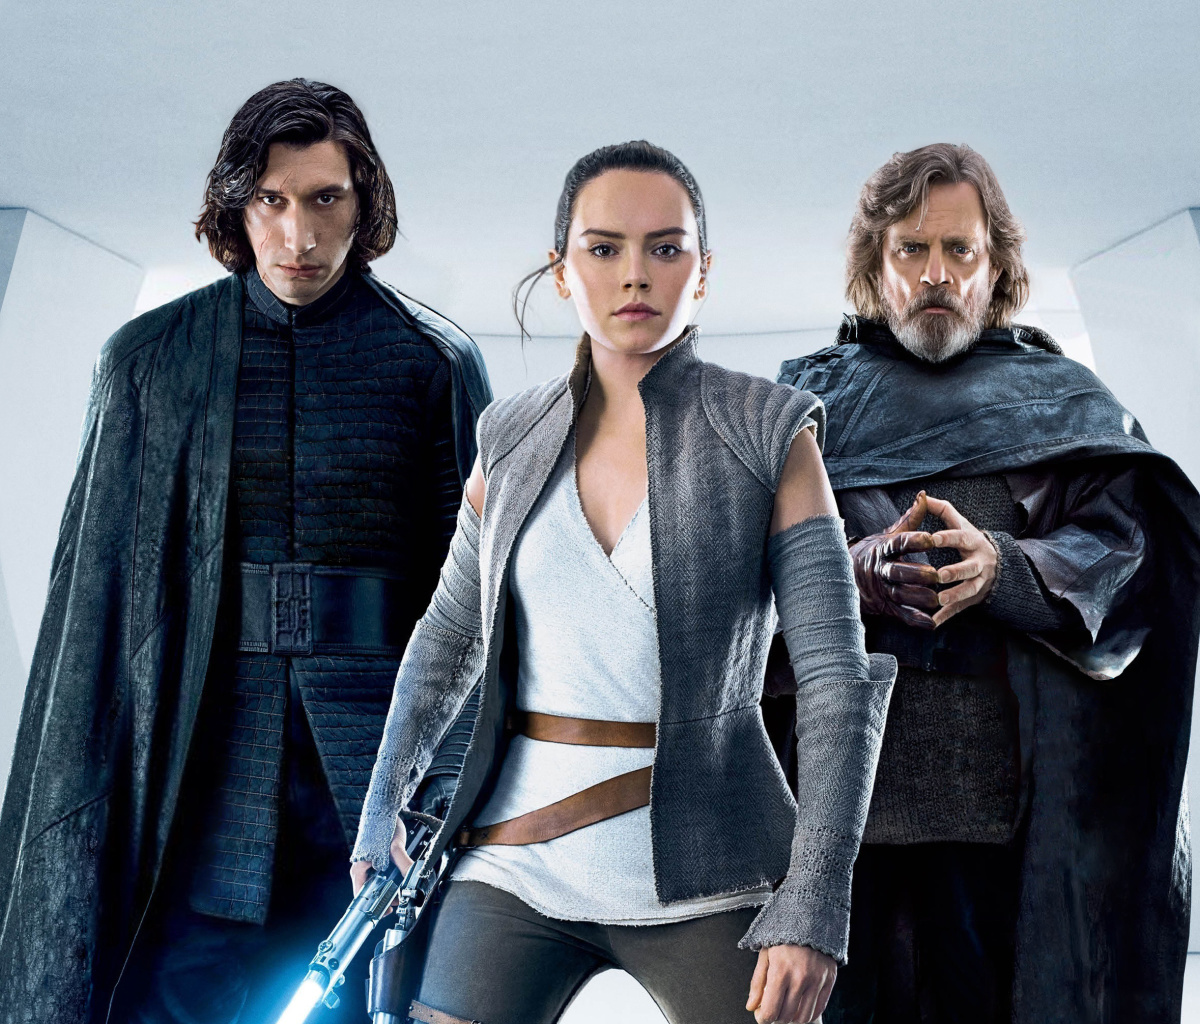 Star Wars The Last Jedi with Rey and Kylo Ren Shirtless wallpaper 1200x1024